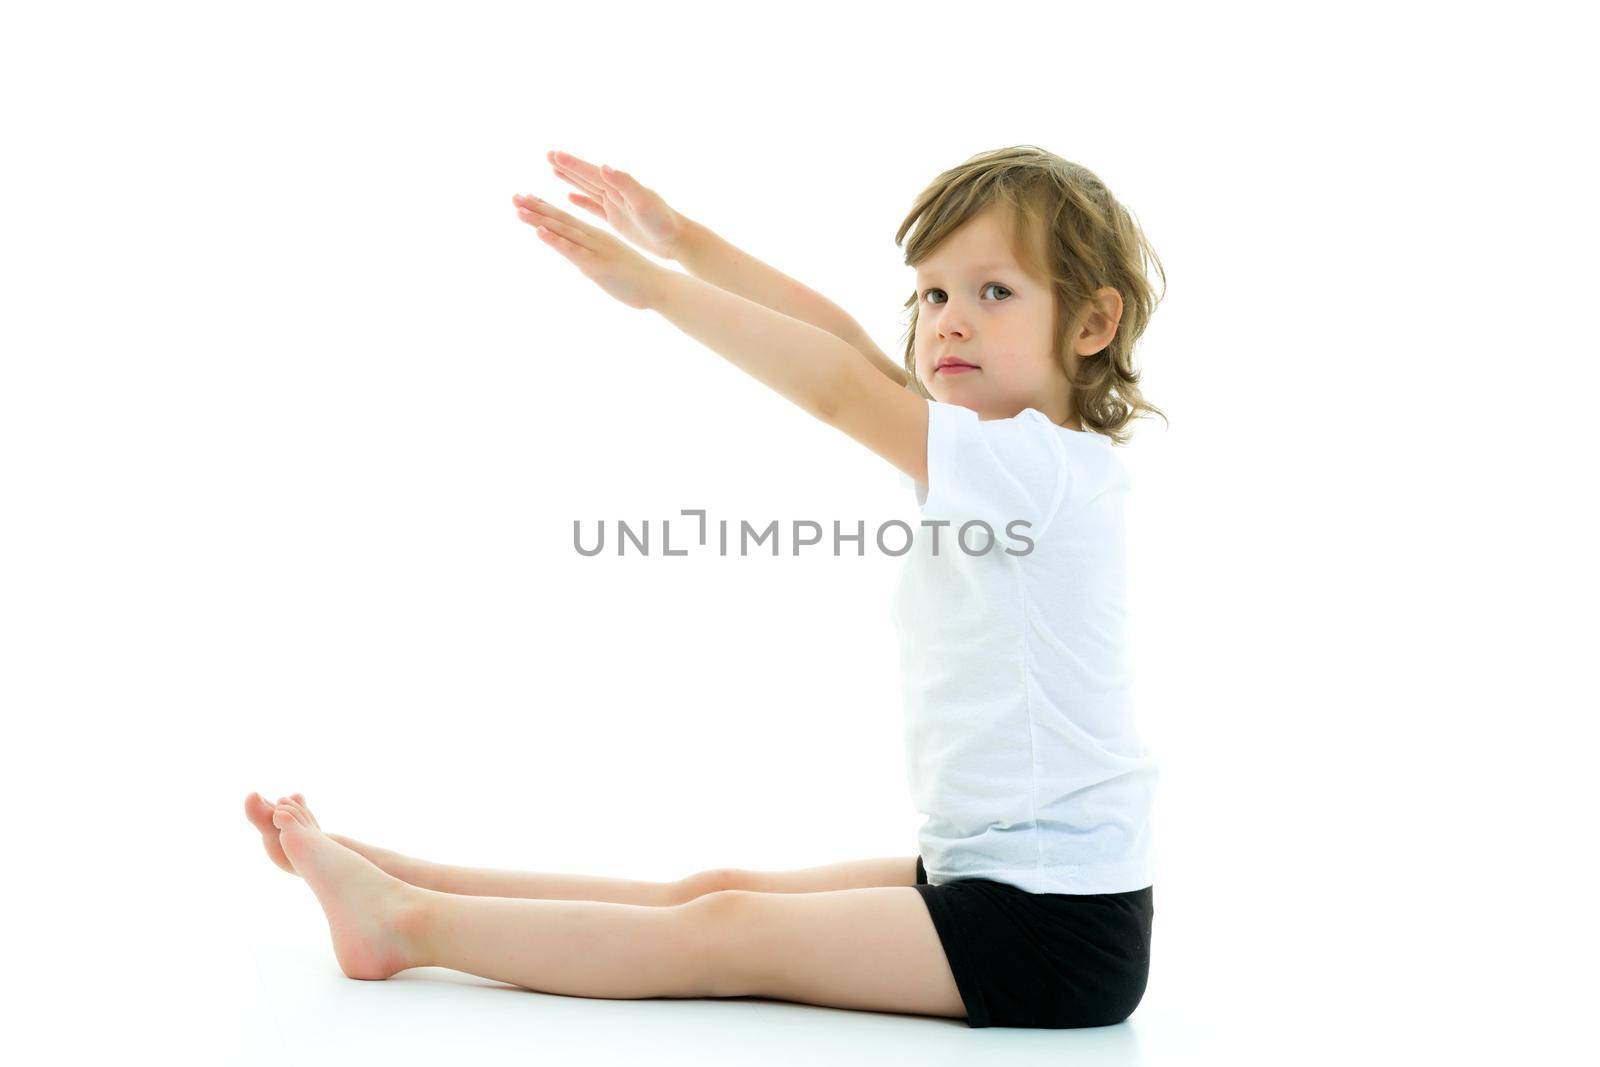 Cute little girl performs gymnastic exercises on the floor in the studio on a white background. The concept of sports, the physical development of children